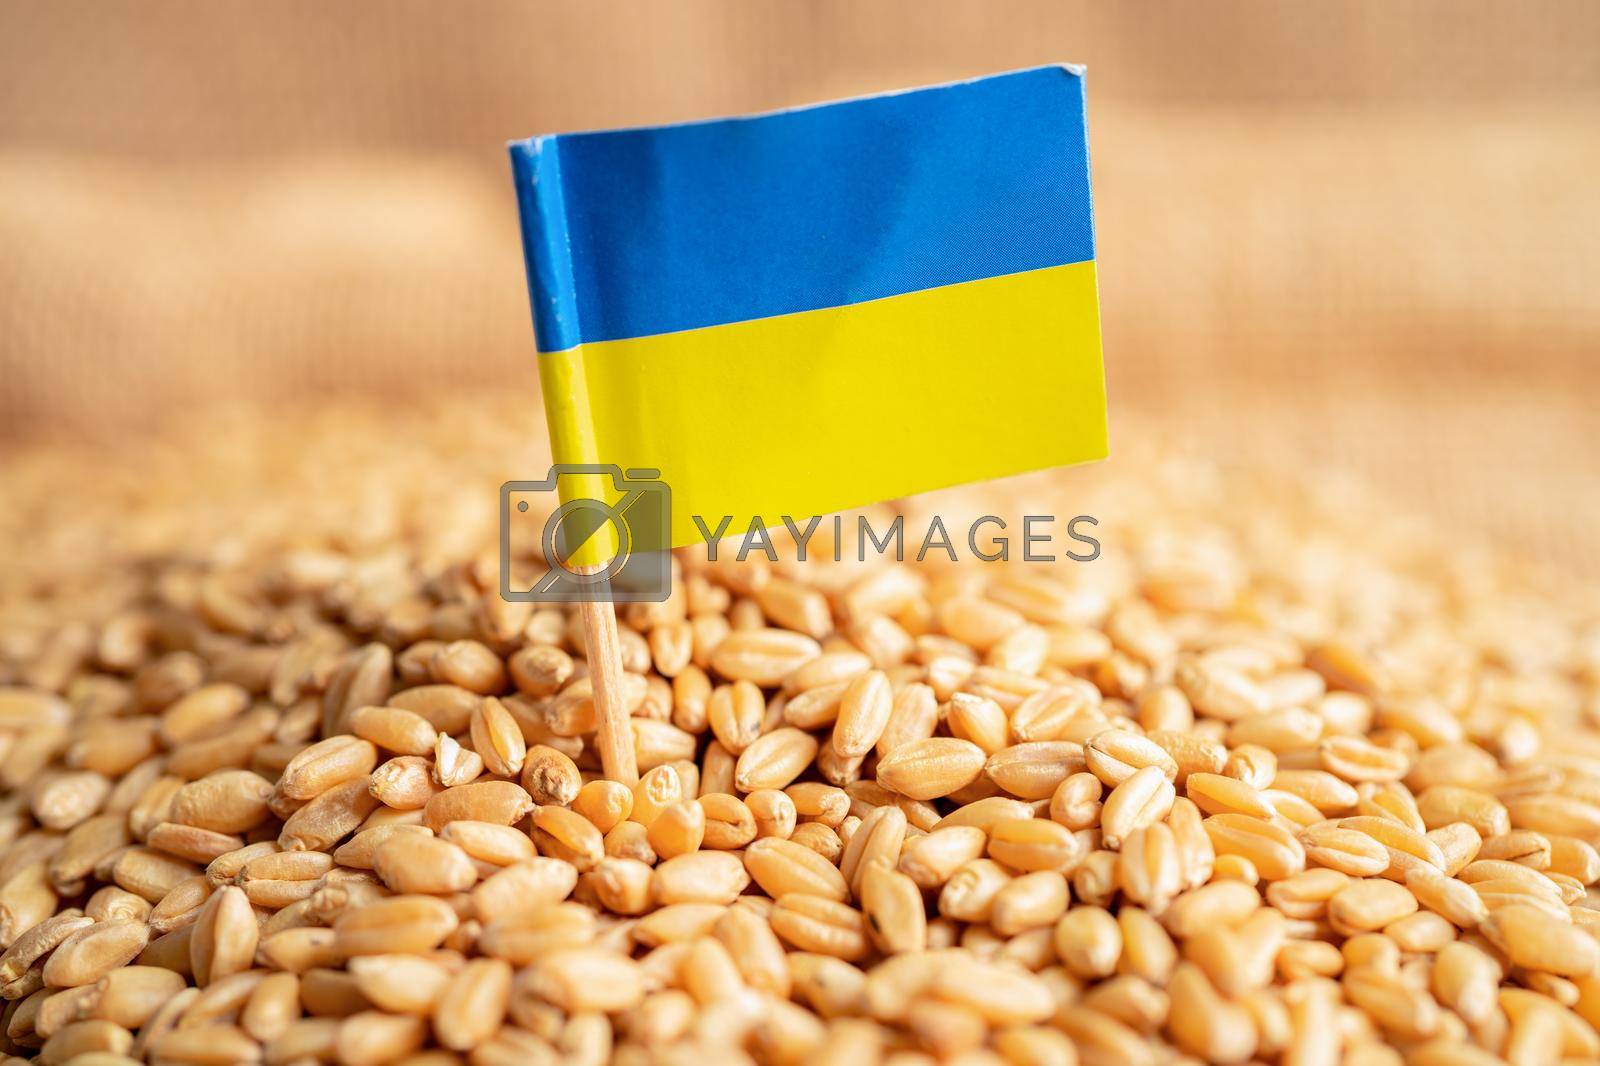 Royalty free image of Grains wheat with Ukraine flag, trade export and economy concept. by pamai